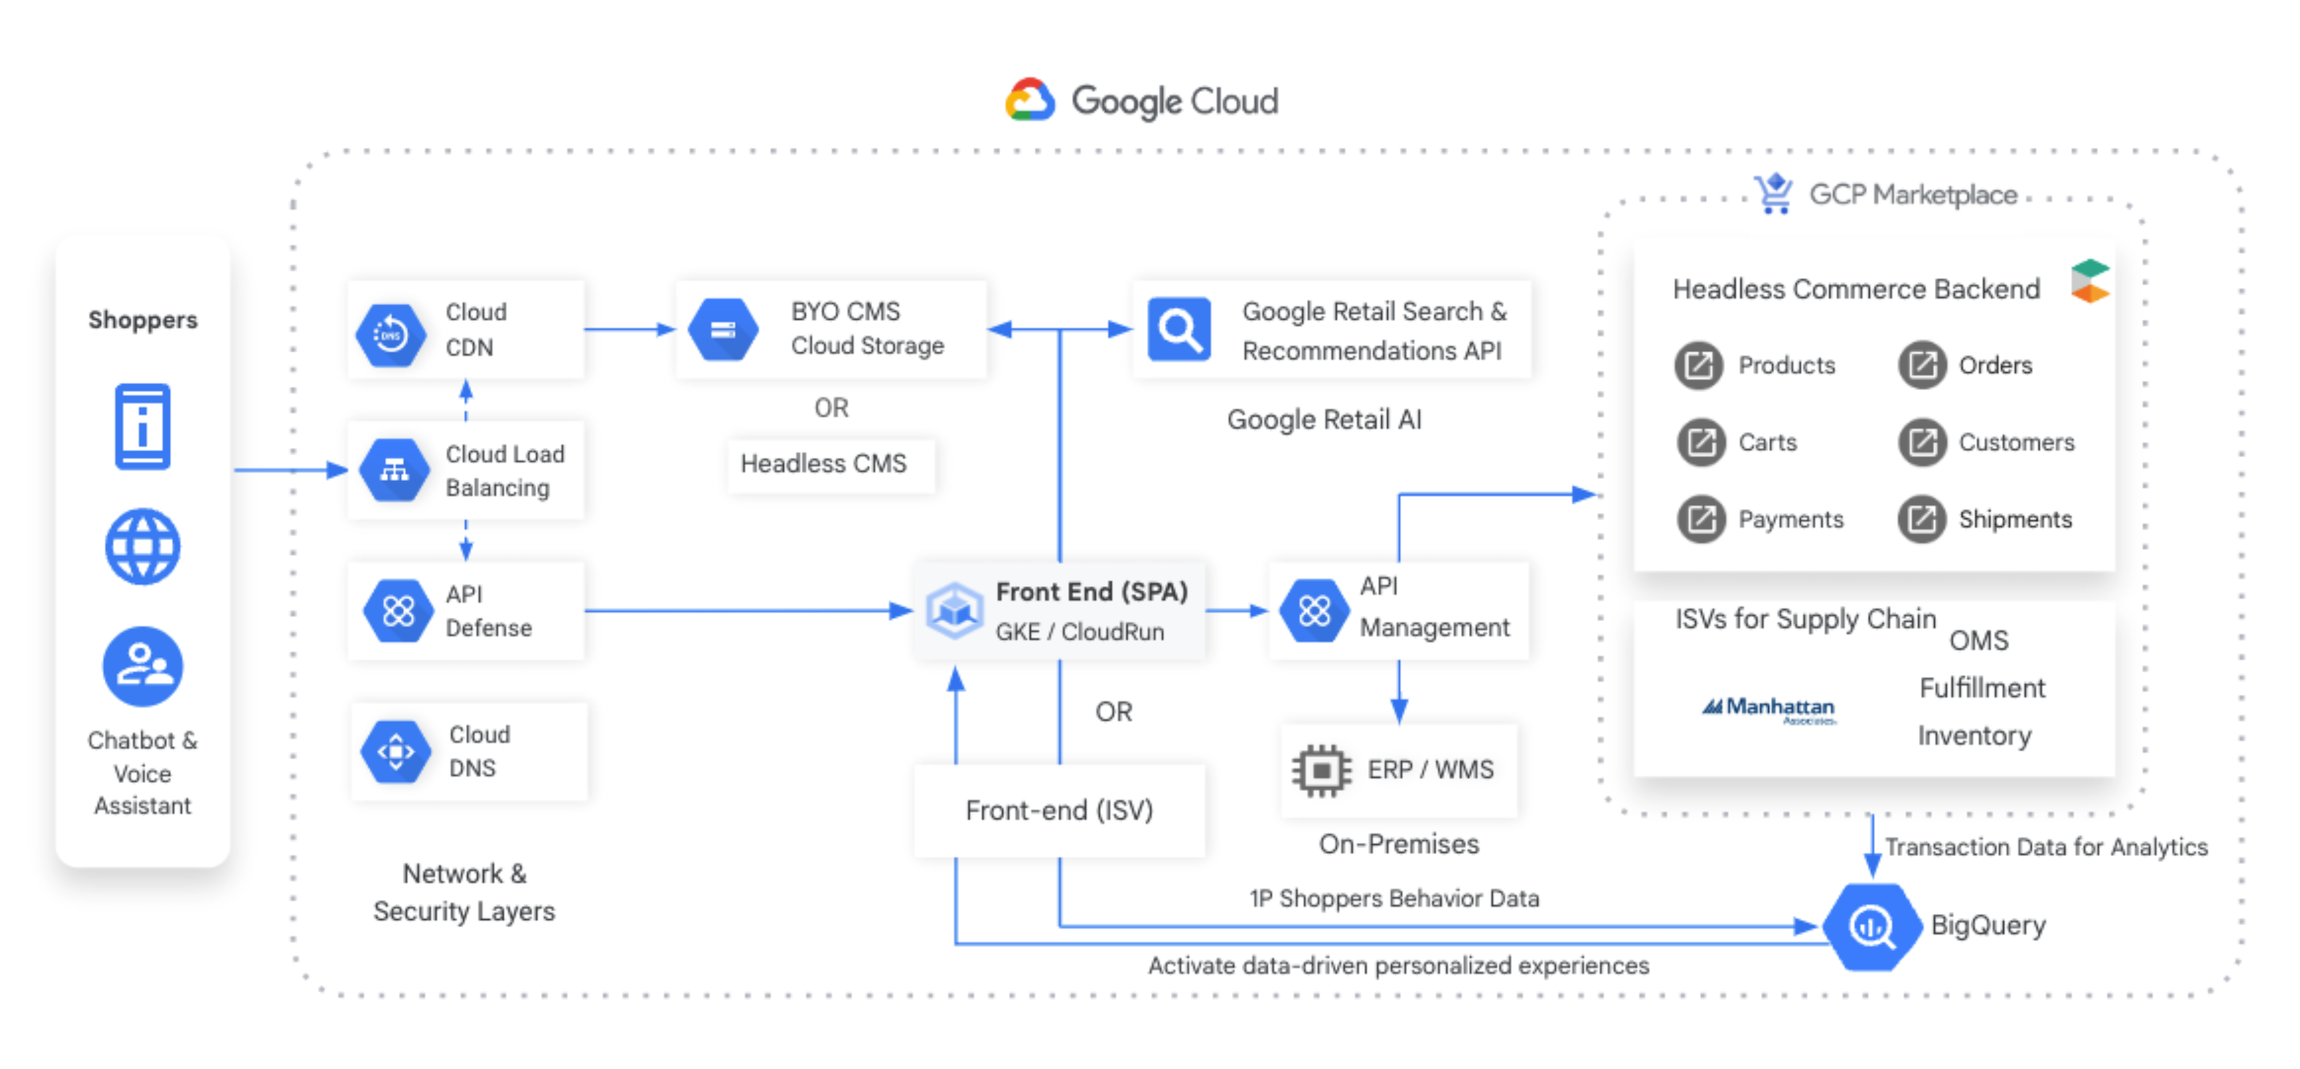 Google Cloud composable architecture with commercetools